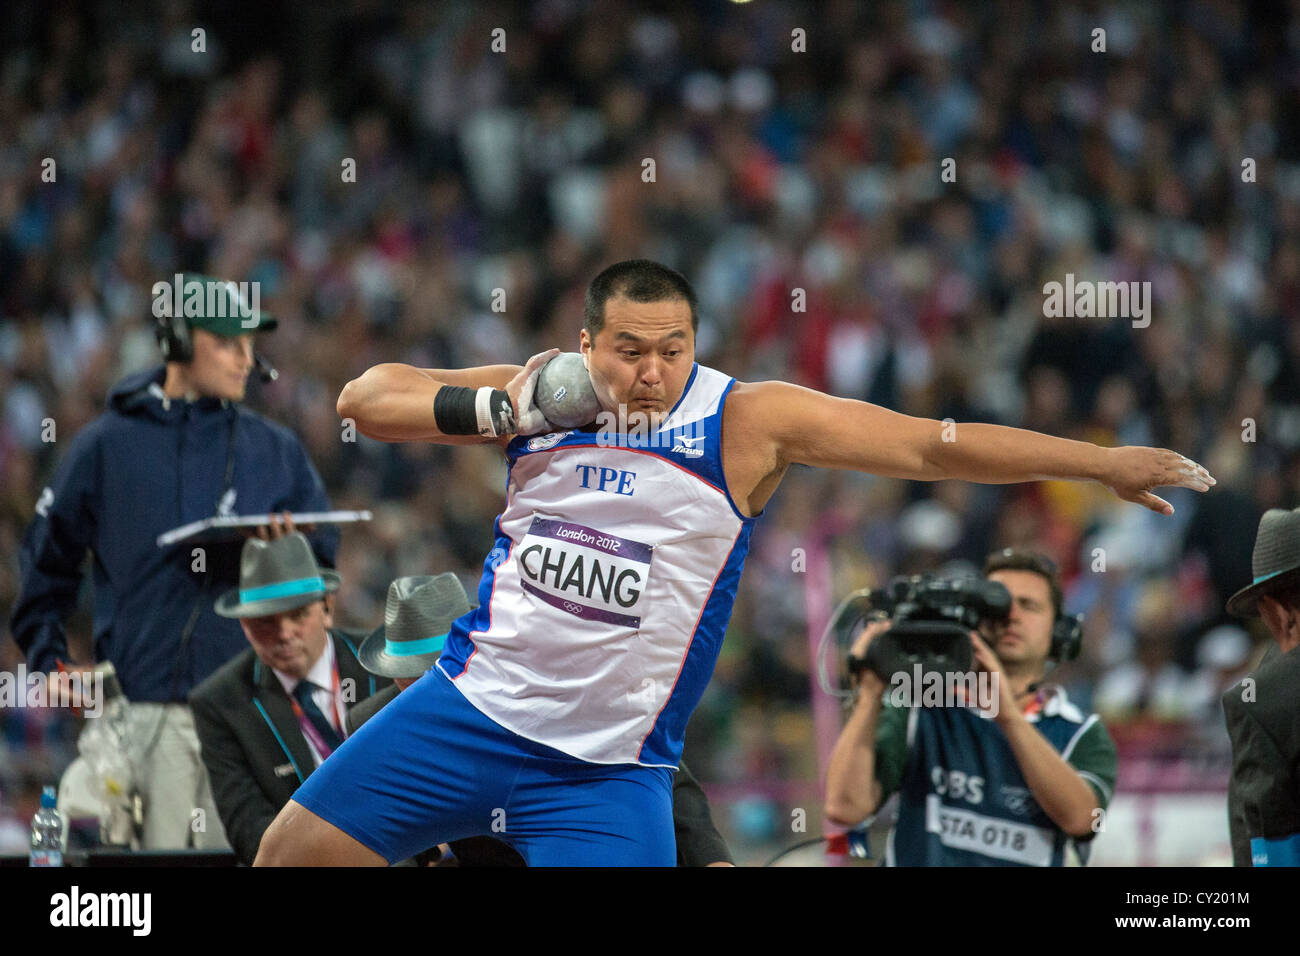 Ming-Huang Chang (TPE) competing in the men's shot put at the Olympic Summer Games, London 2012 Stock Photo